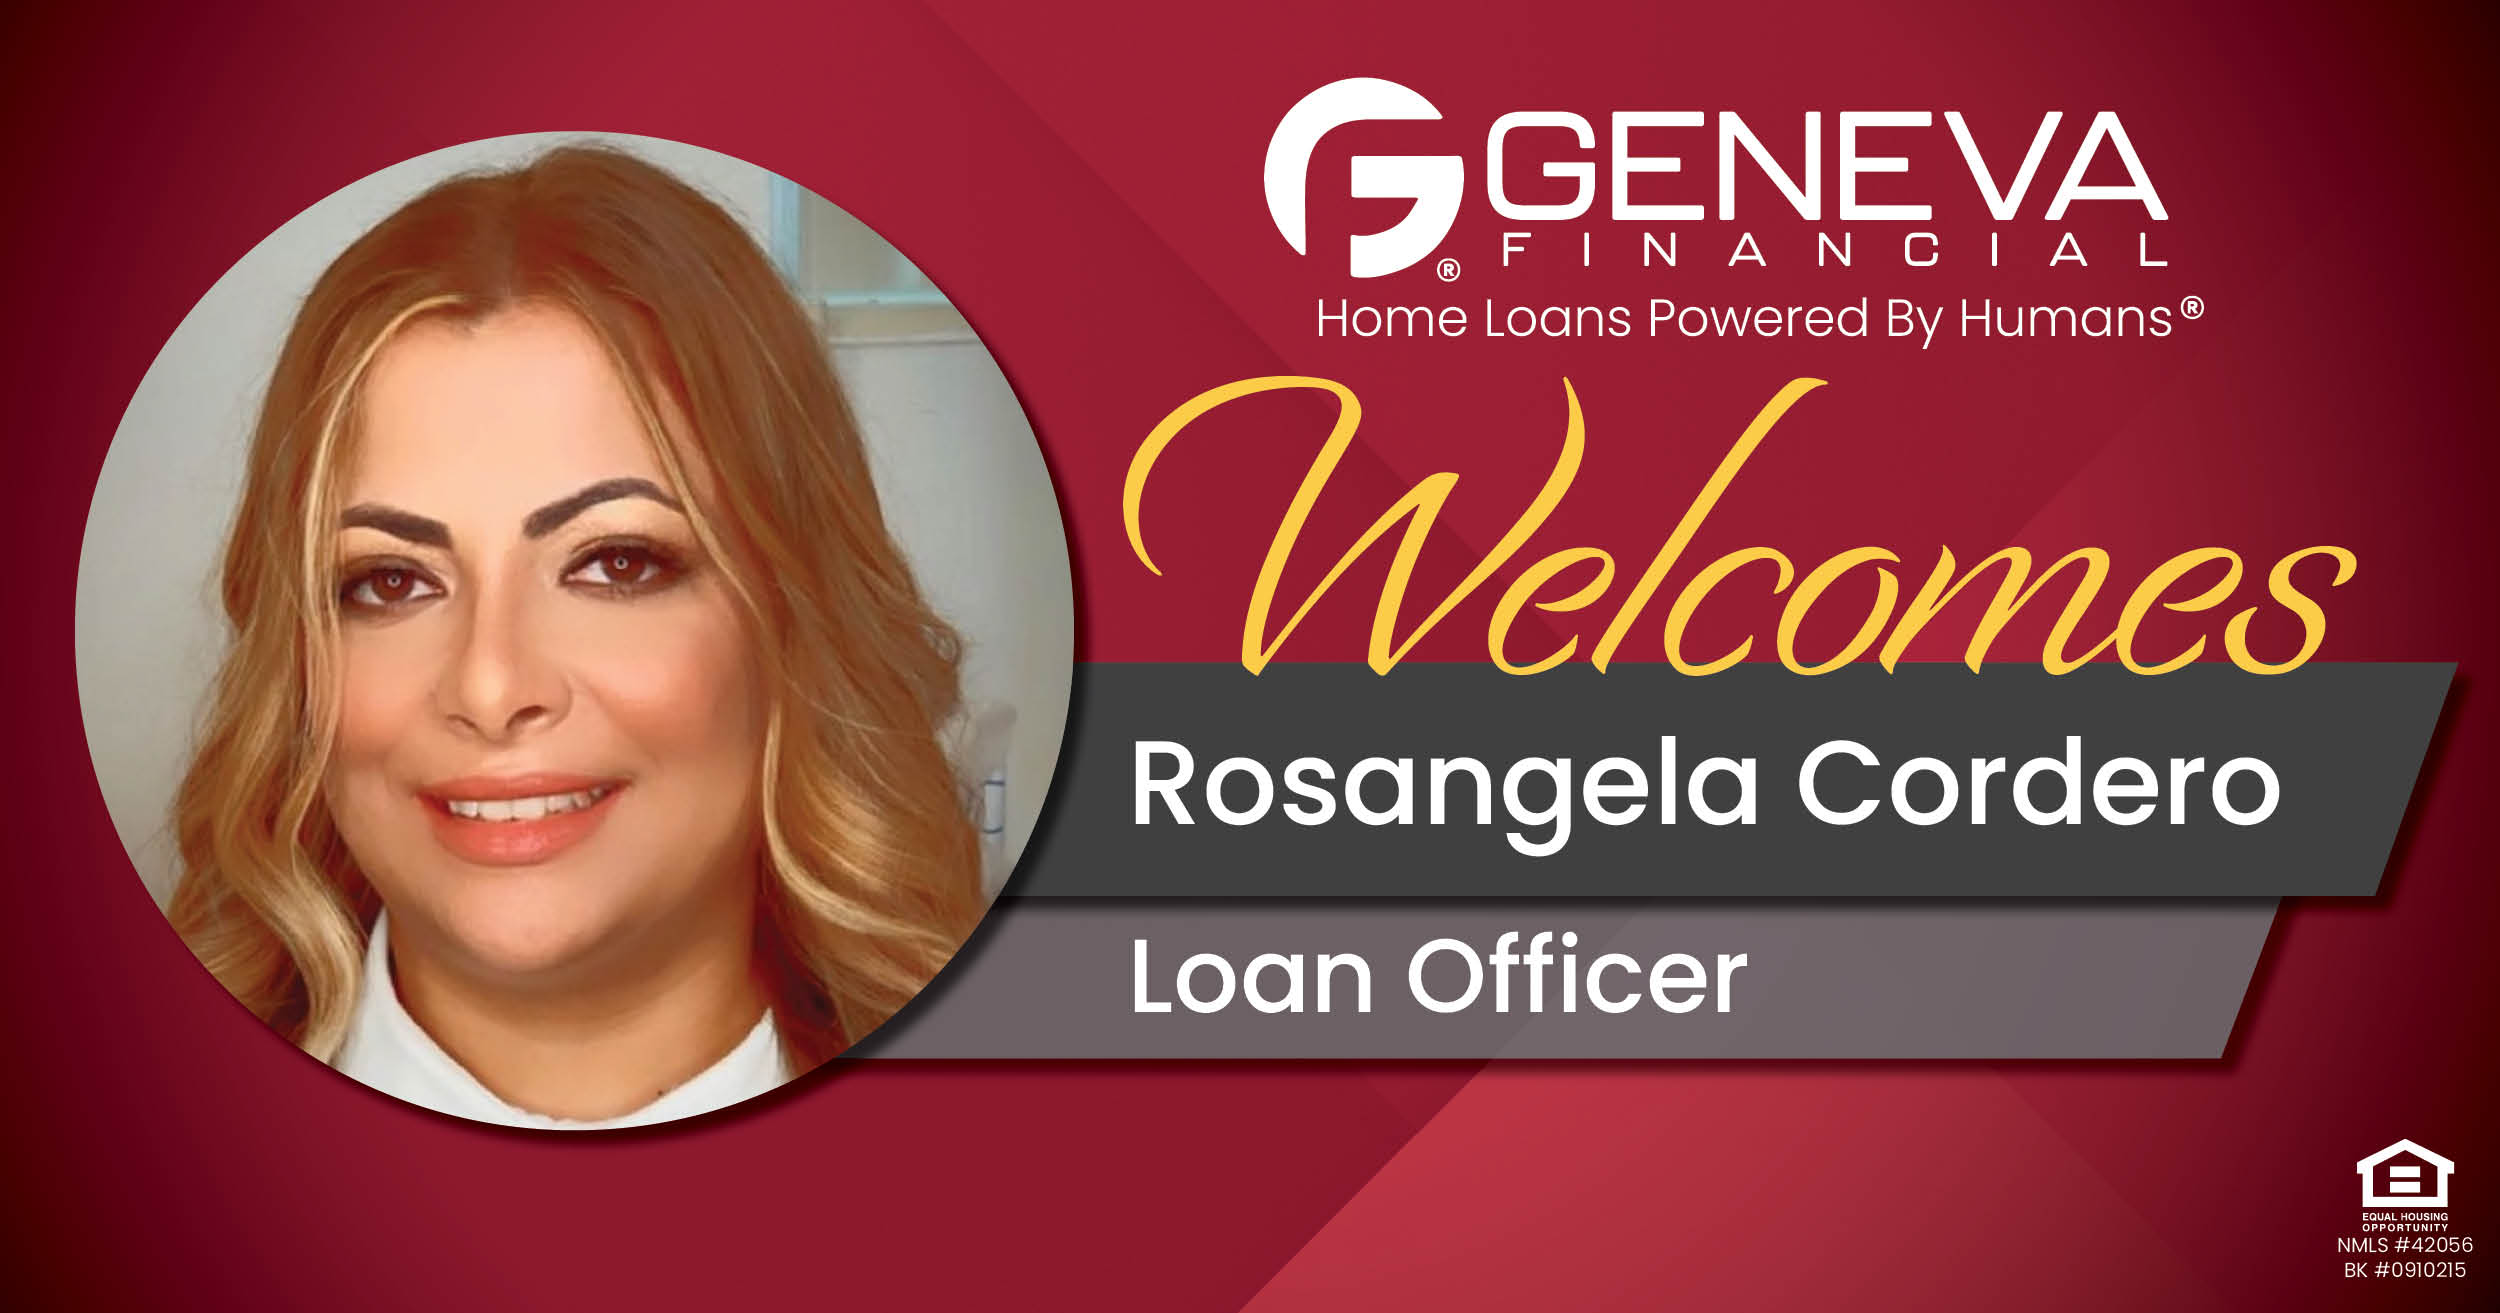 Geneva Financial Welcomes New Loan Officer Rosangela Cordero to Miami, FL – Home Loans Powered by Humans®.